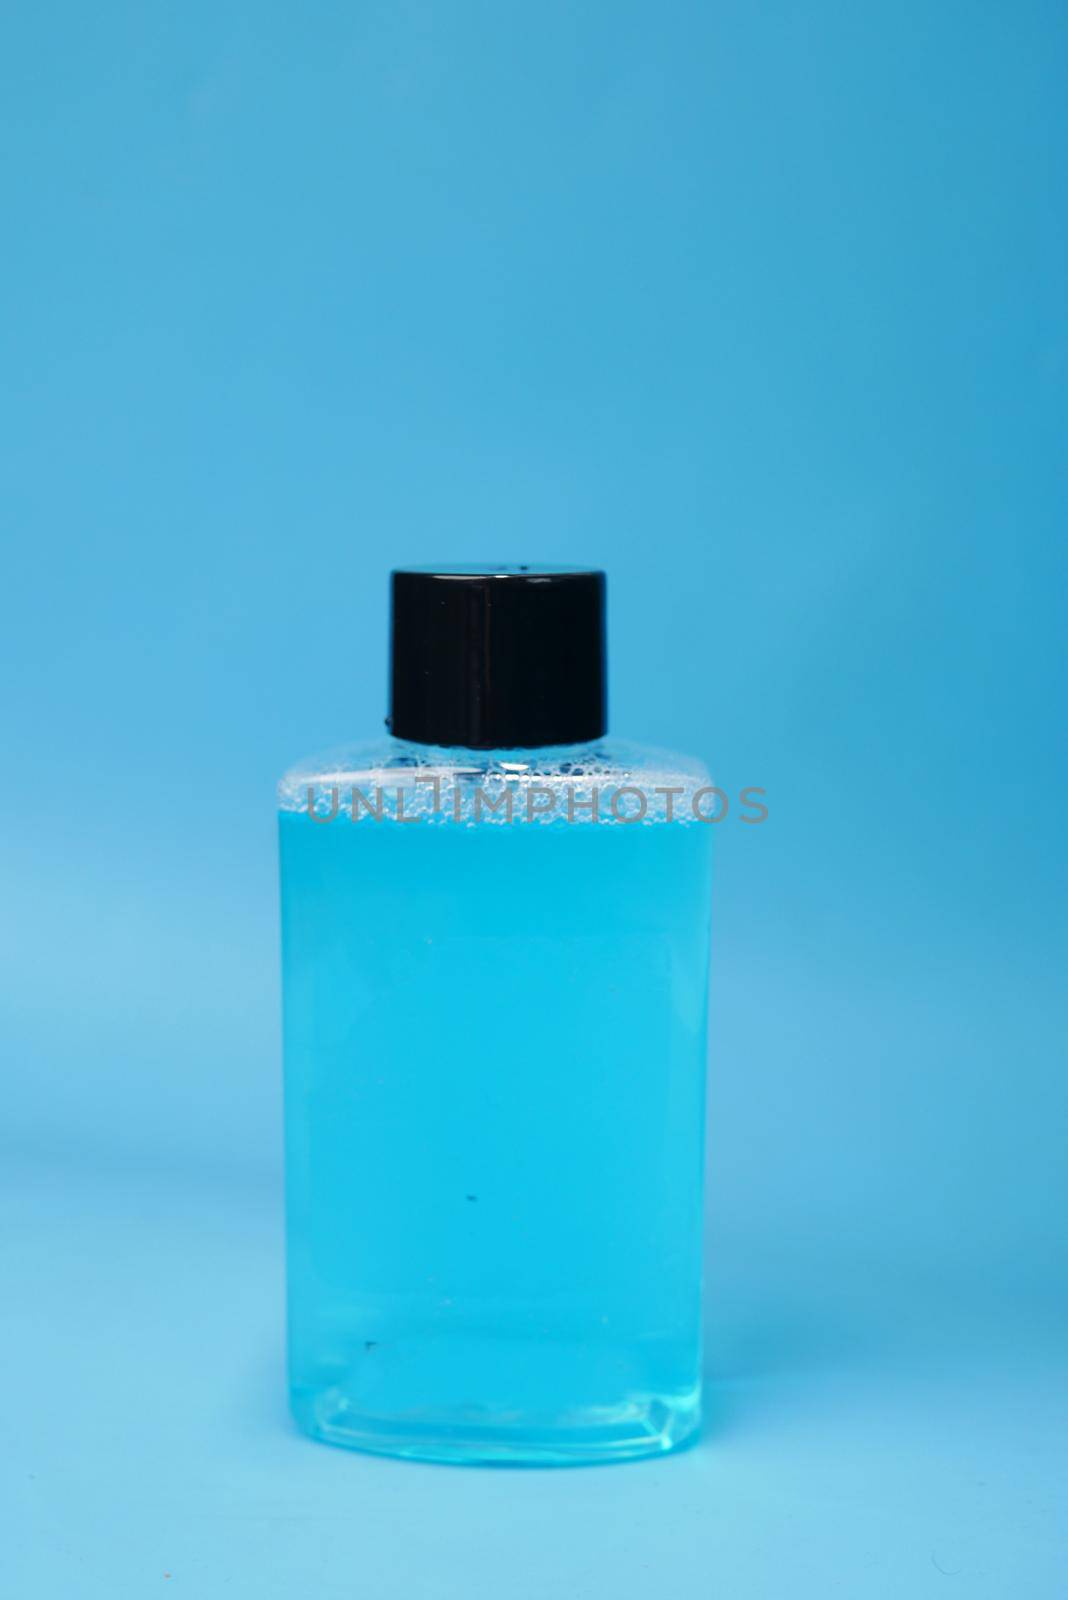 mouthwash liquid in a container on table ,